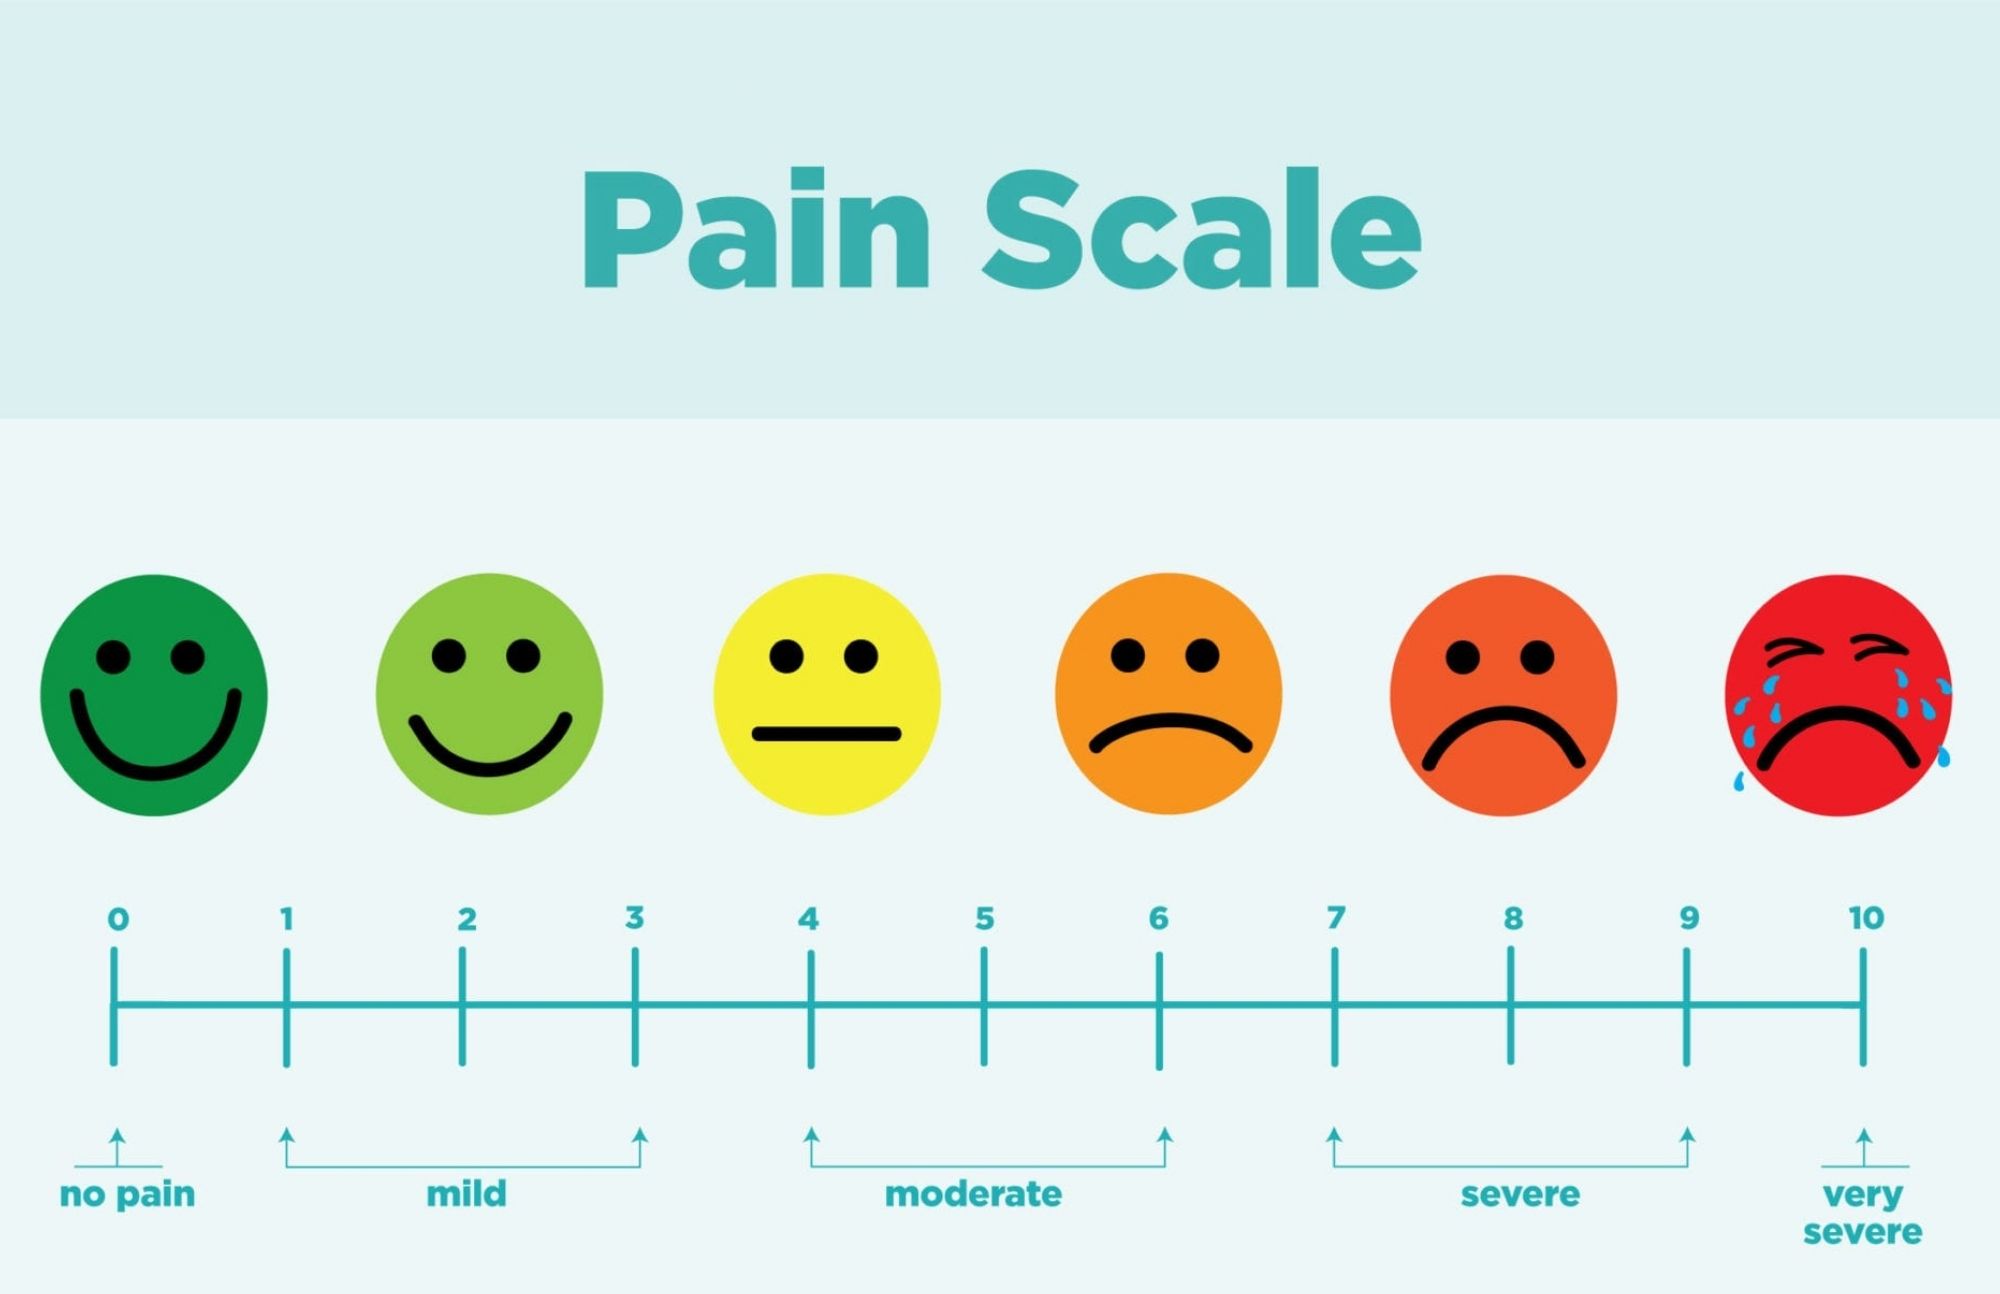 Set of different emojis from no pain to very severe pain